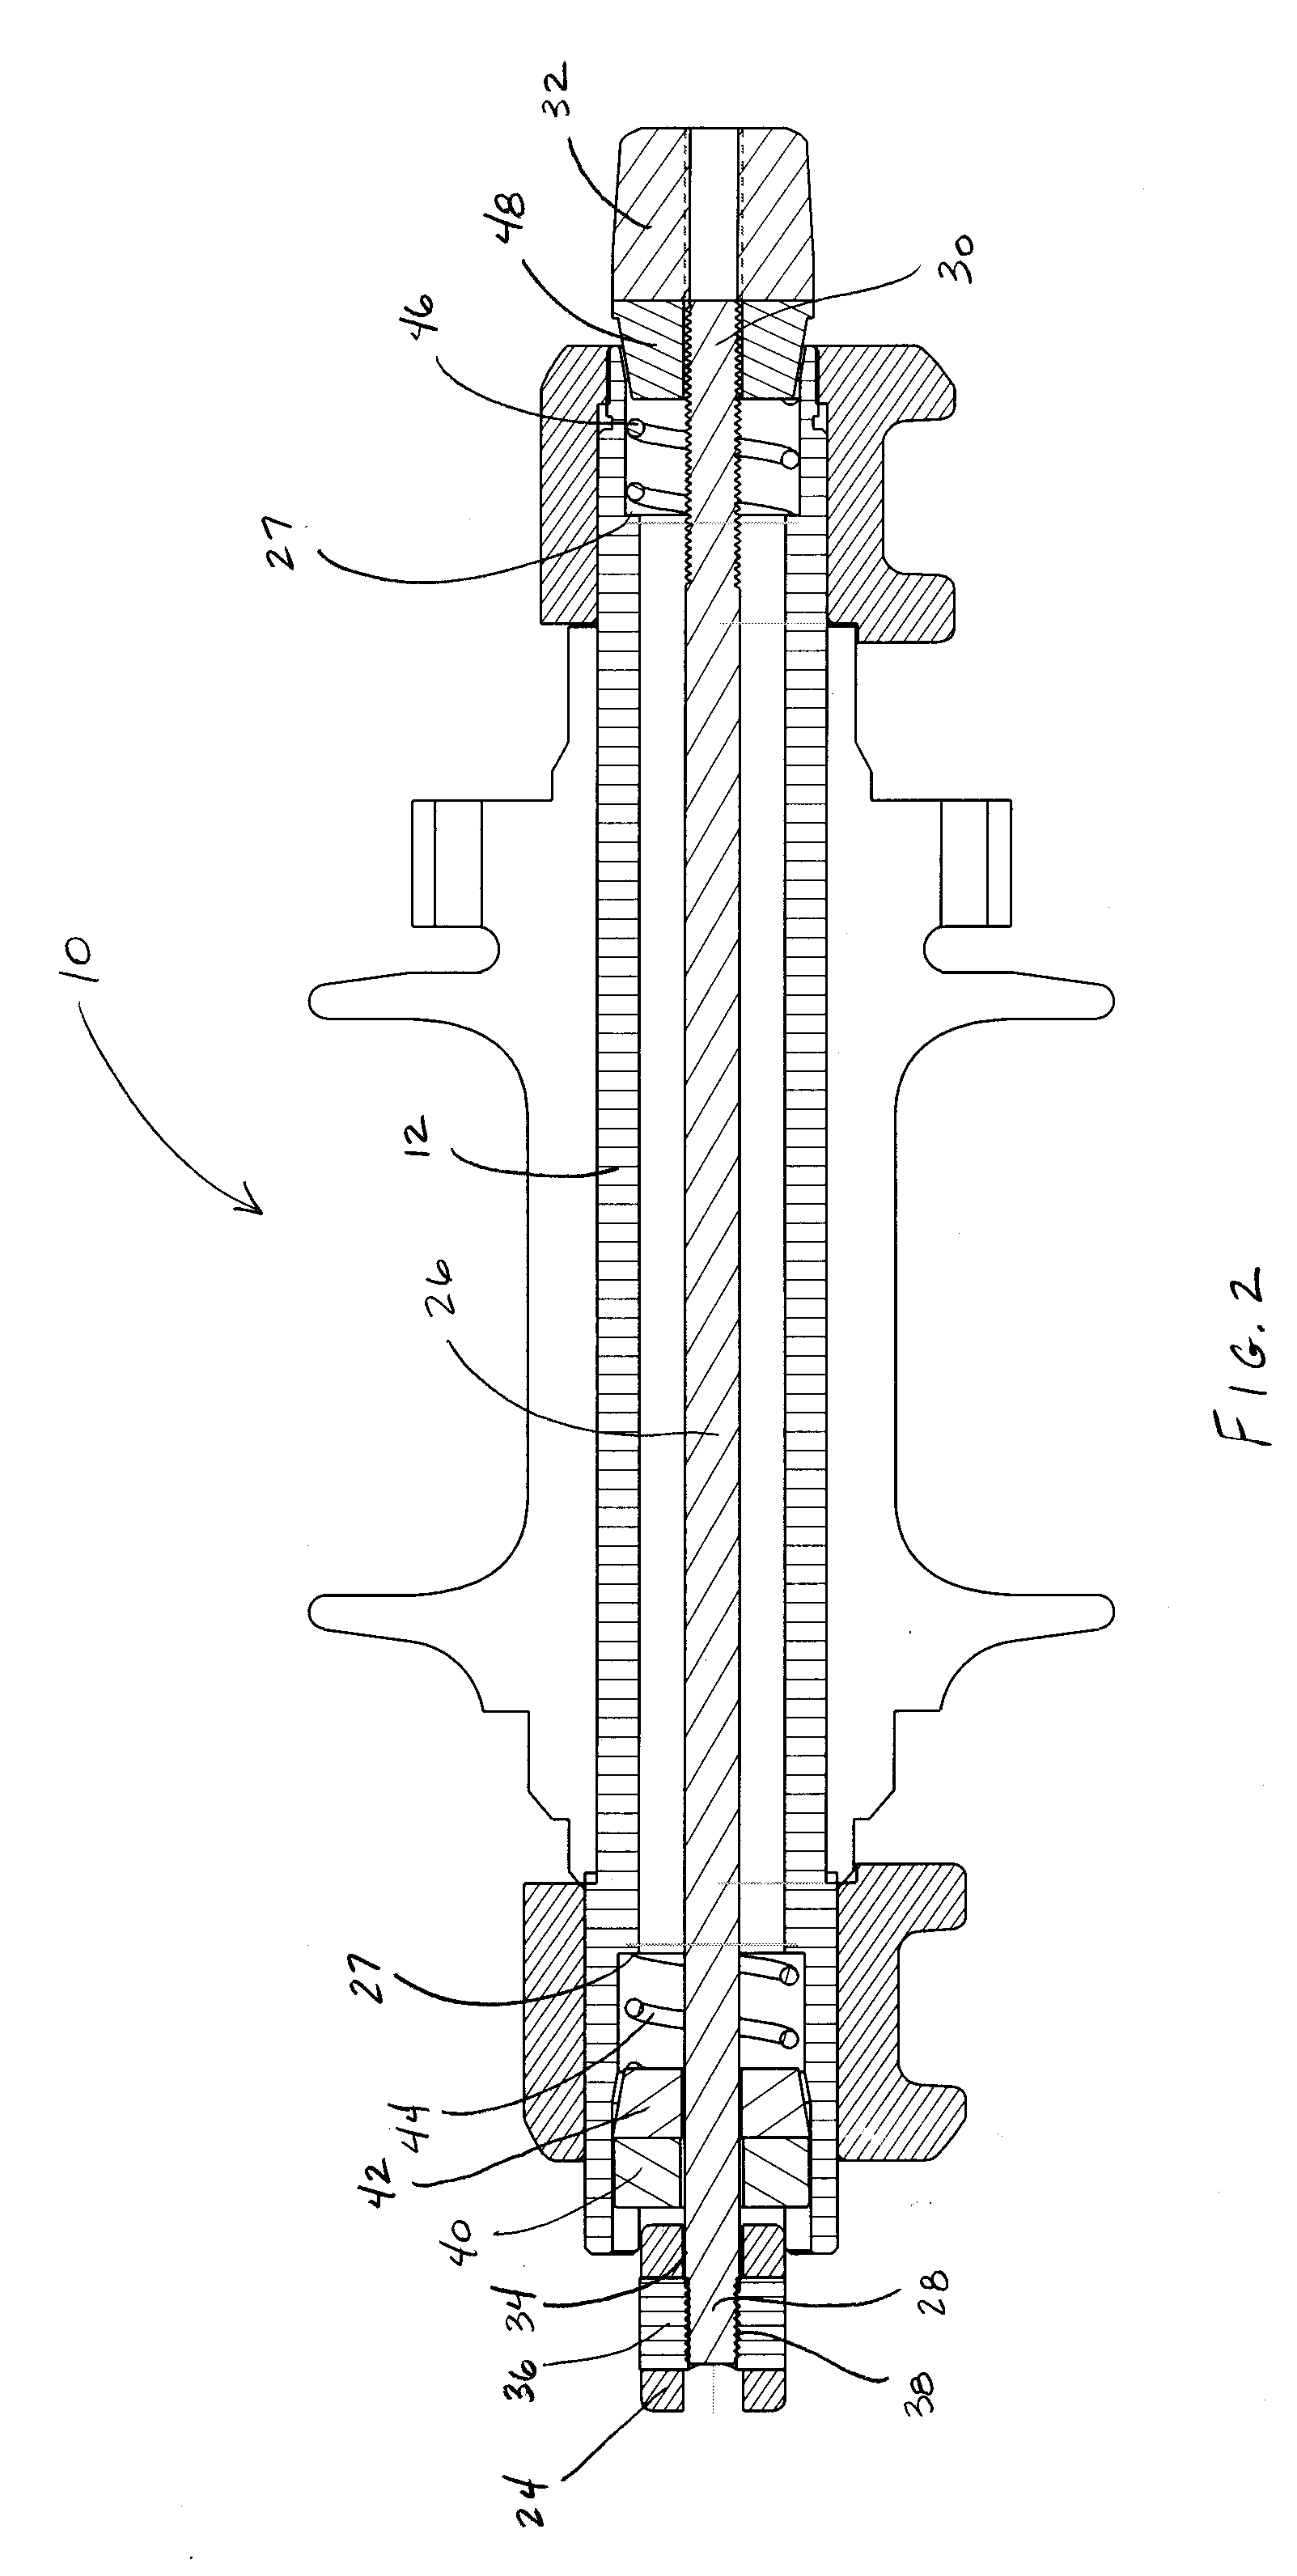 Axle assembly for mounting a wheel to a vehicle